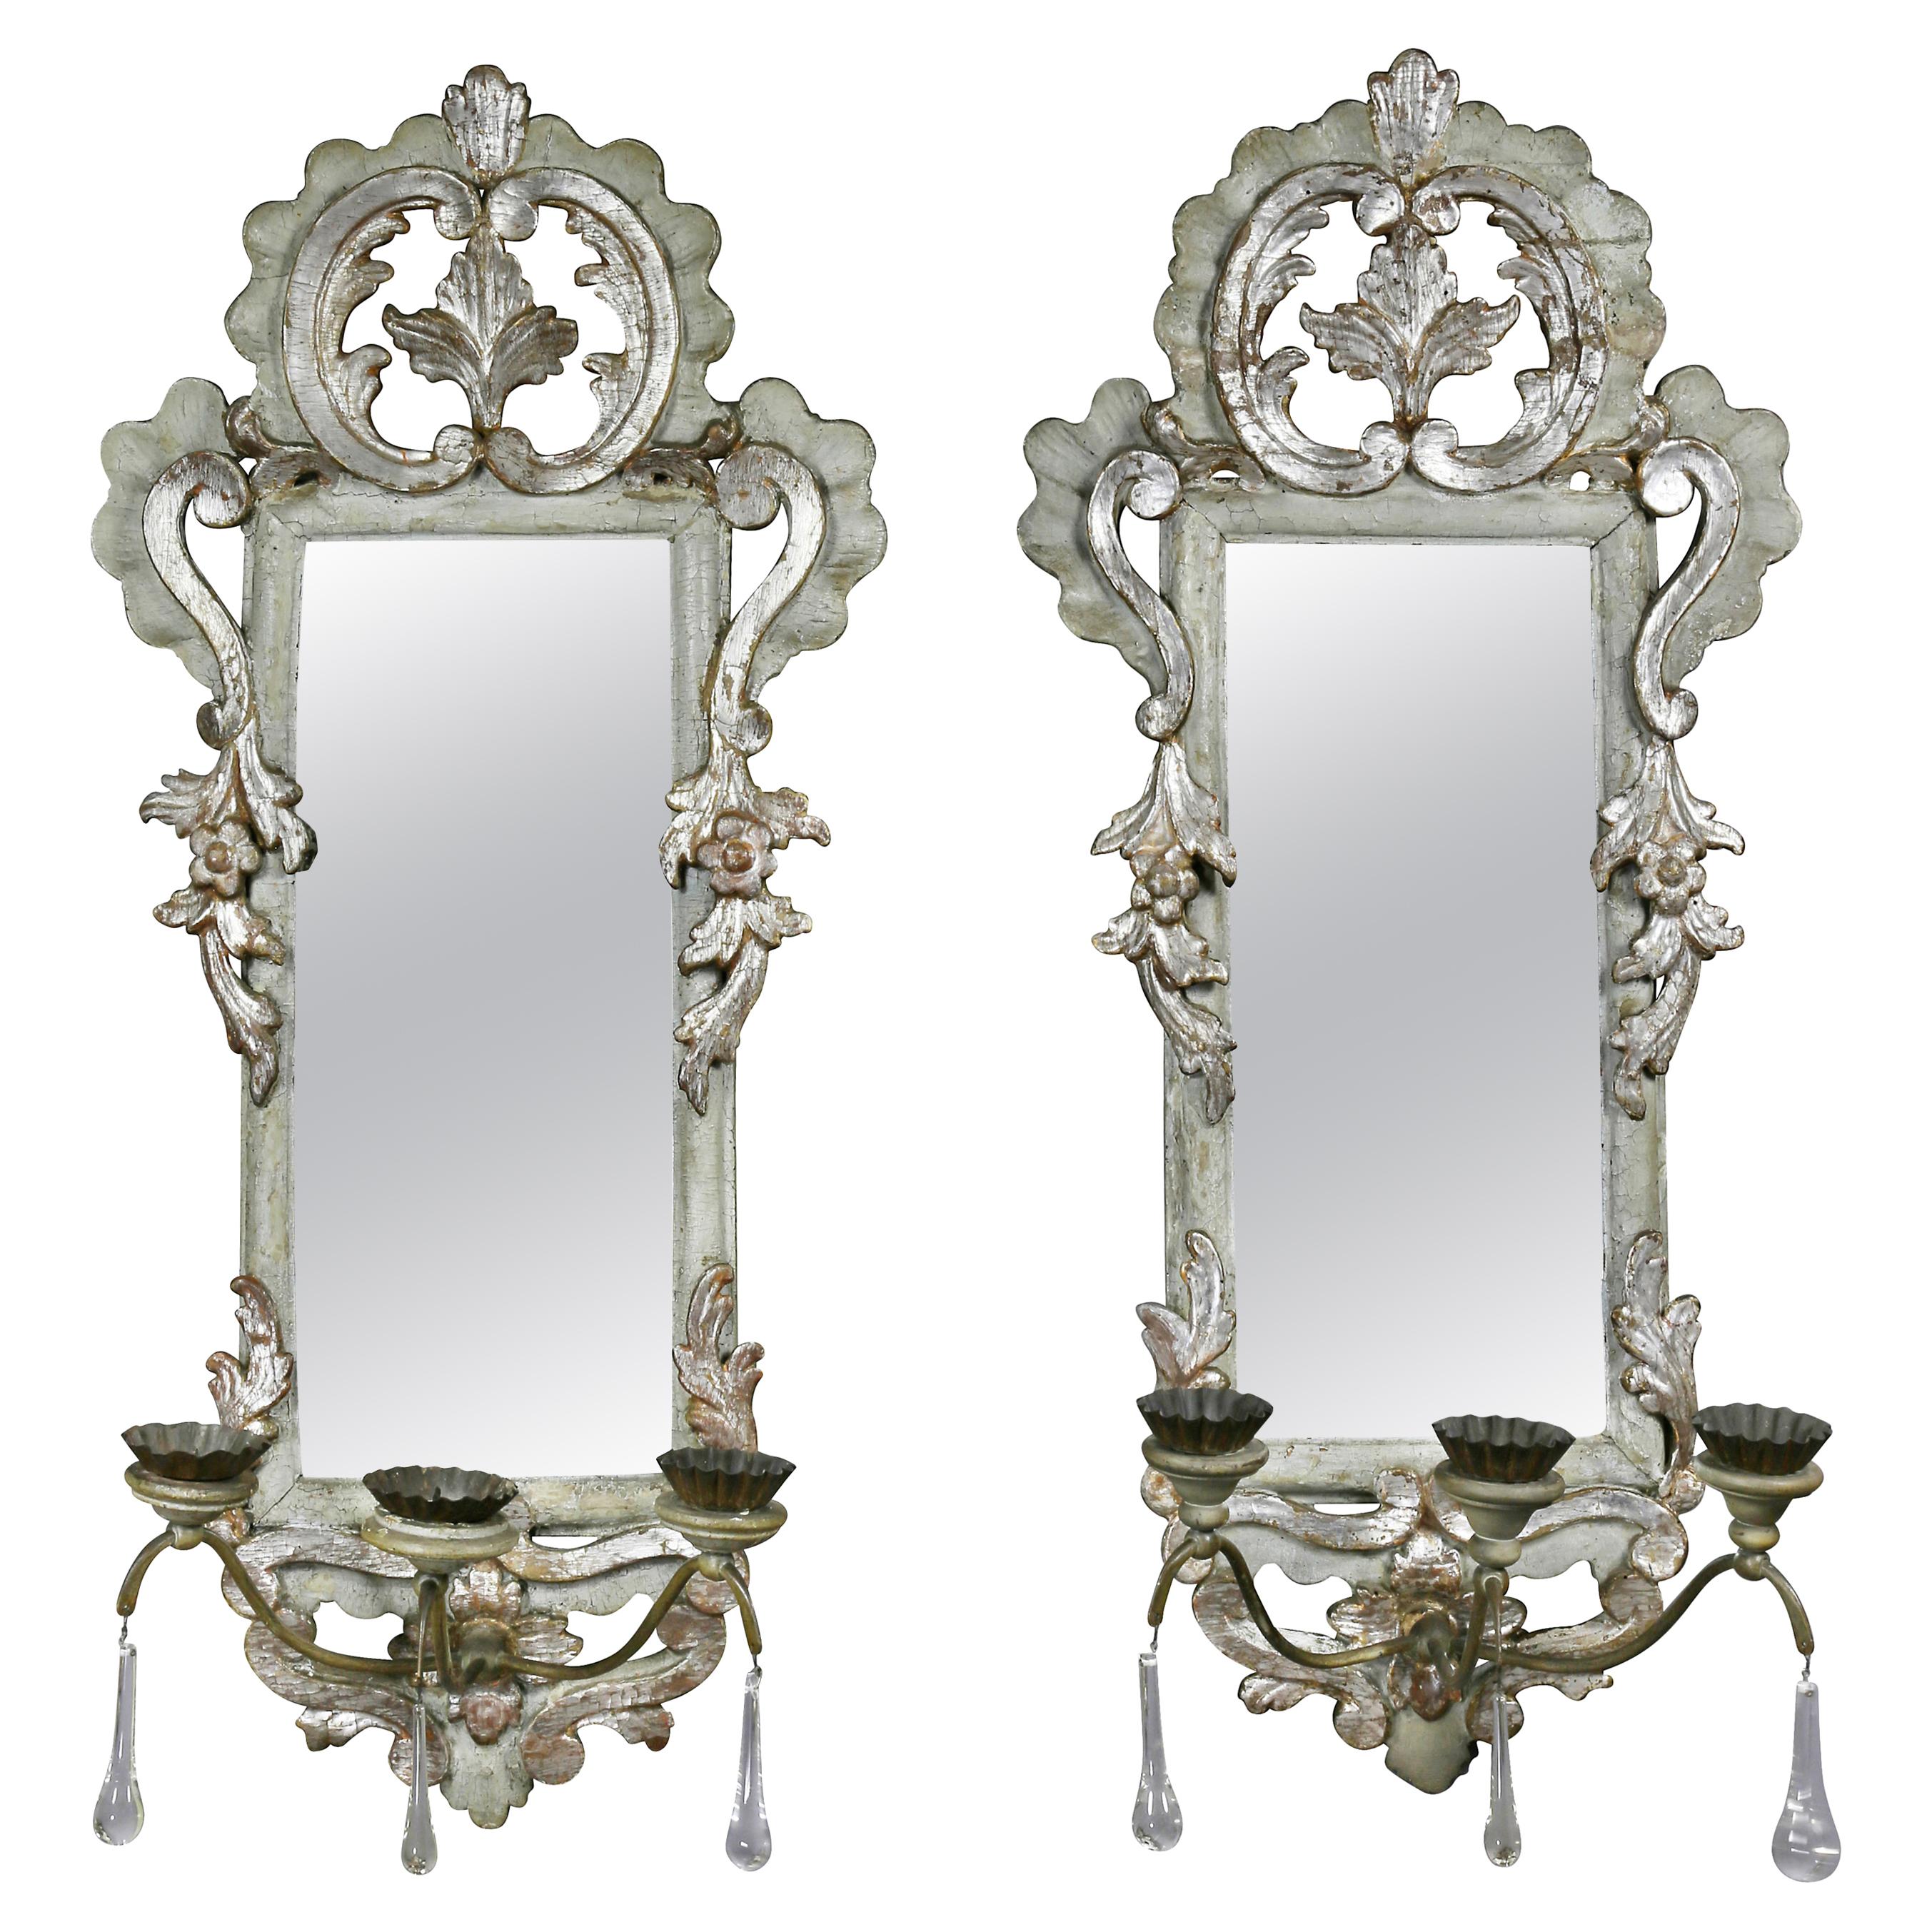 Pair of Italian Rococo Gray Painted and Silver Gilt Mirrored Wall Lights